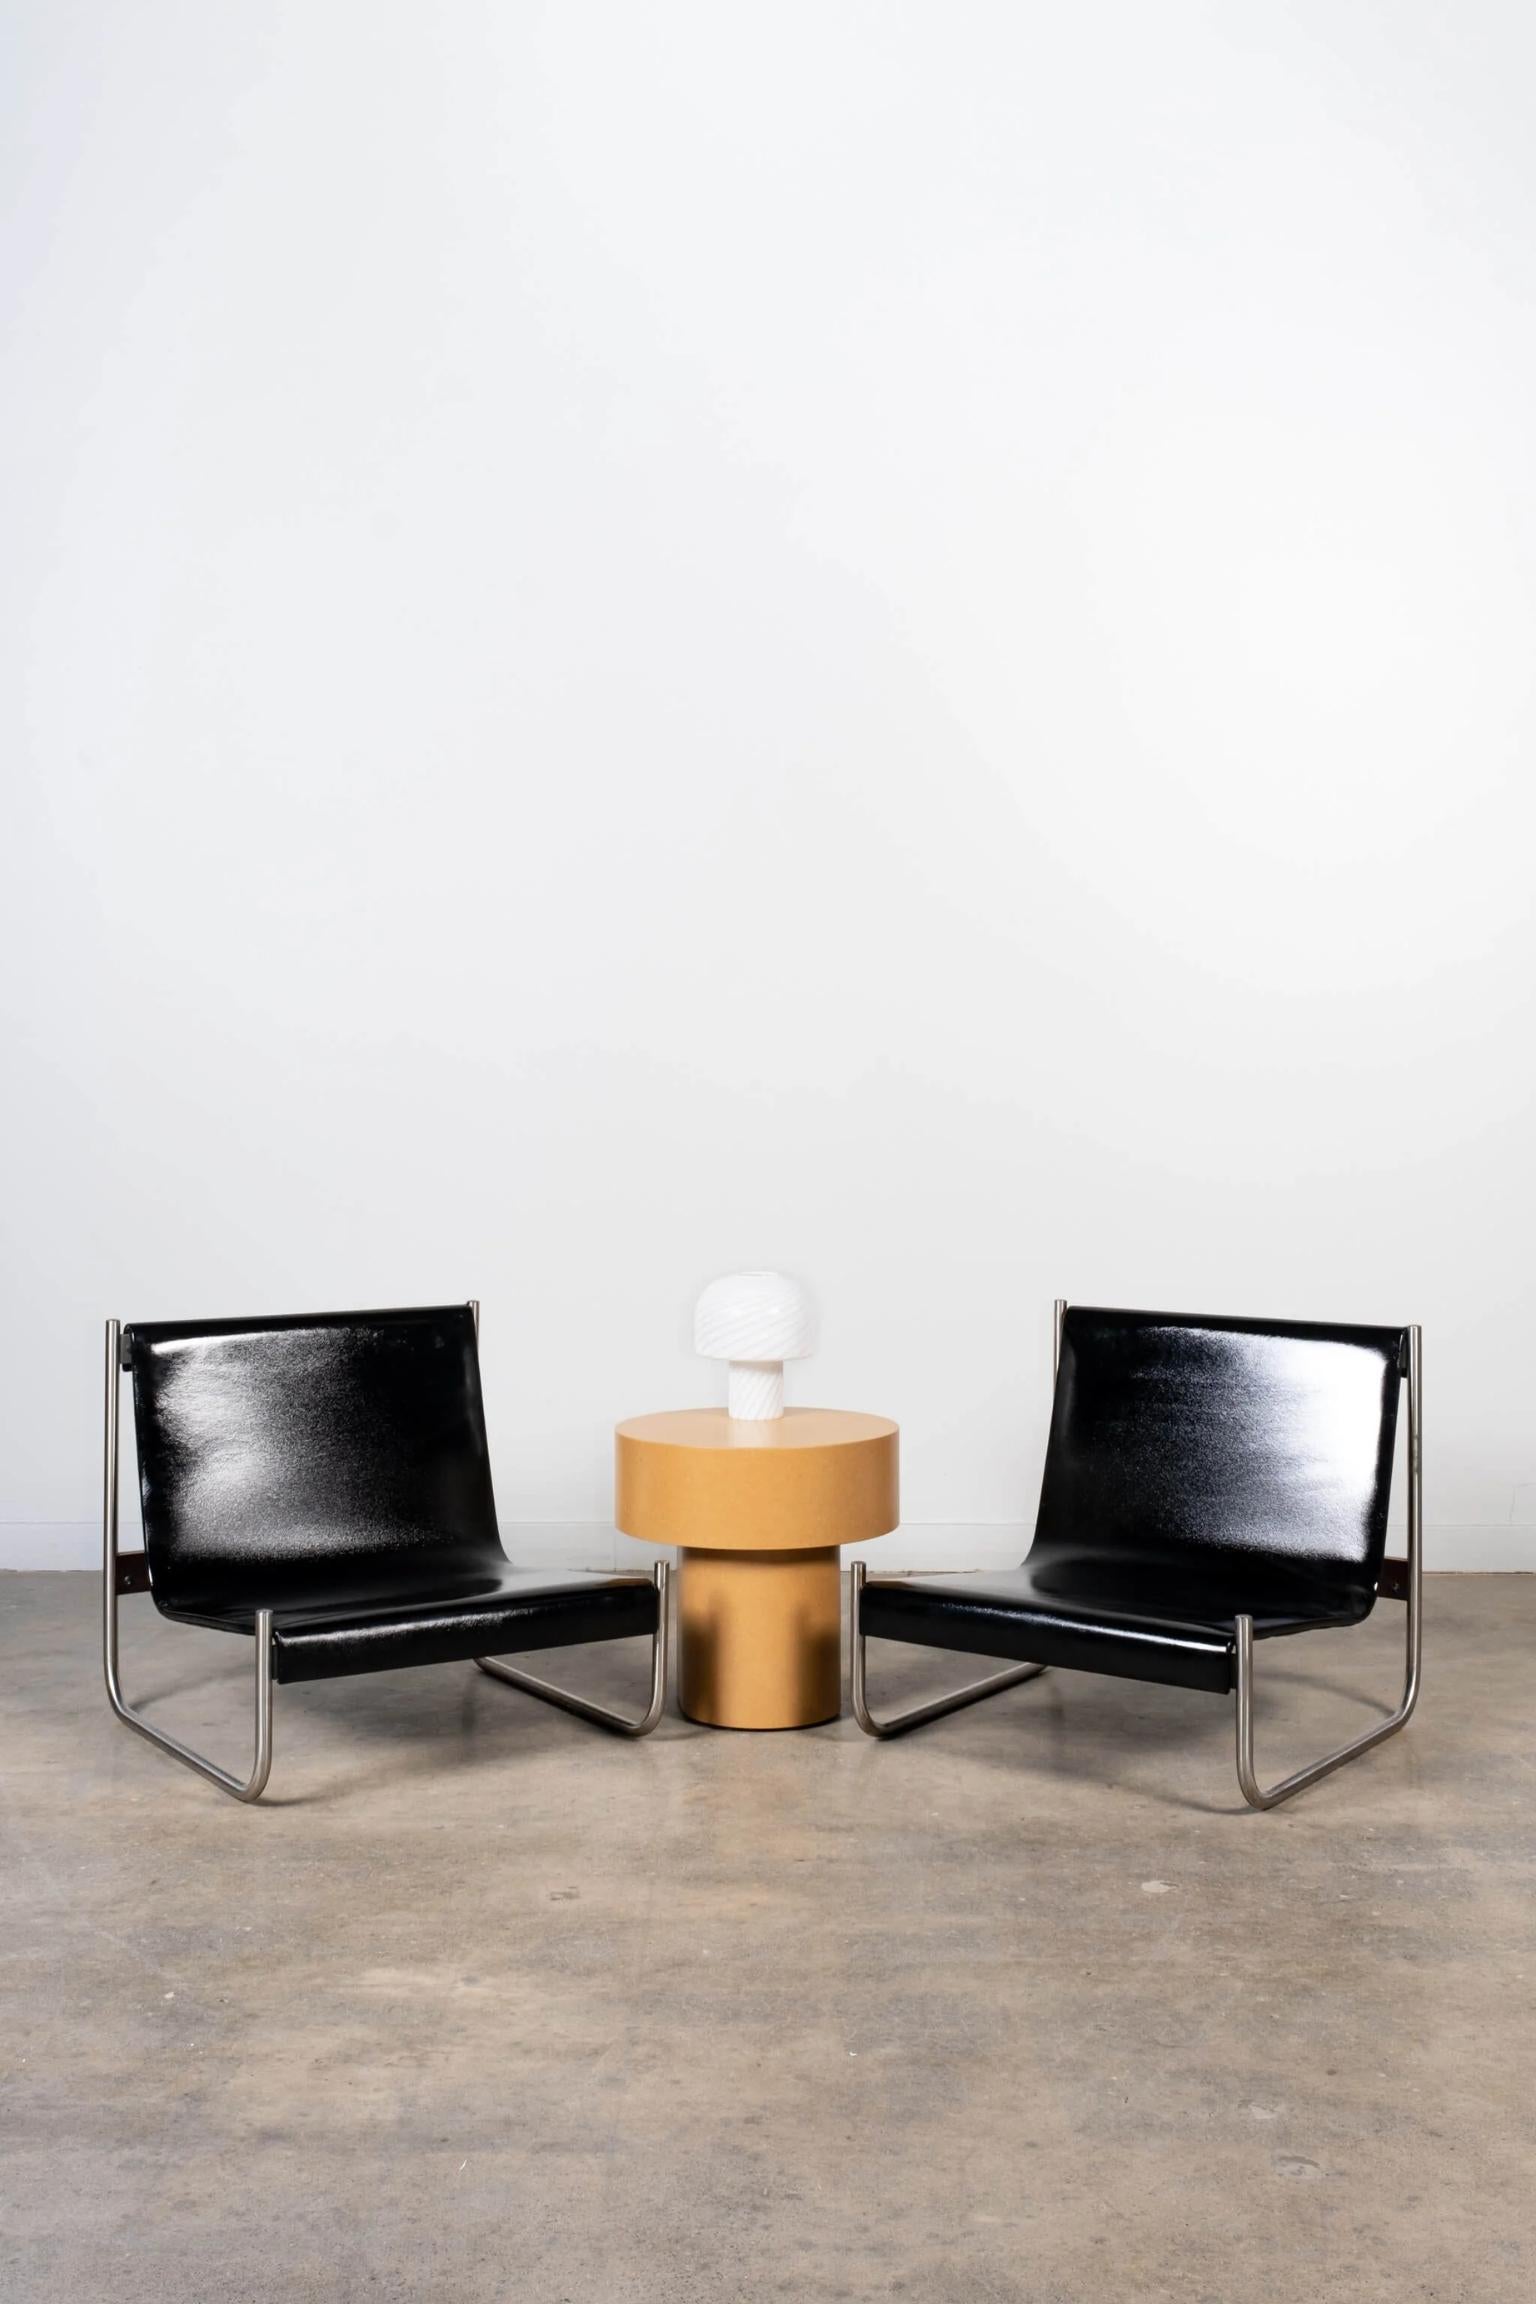 Slick black patent leather stretched over a chrome base, provides cool comfort on the pair of Scuola di Torino lounge chairs. The low-profile armless leather sling chairs are sold as a pair.